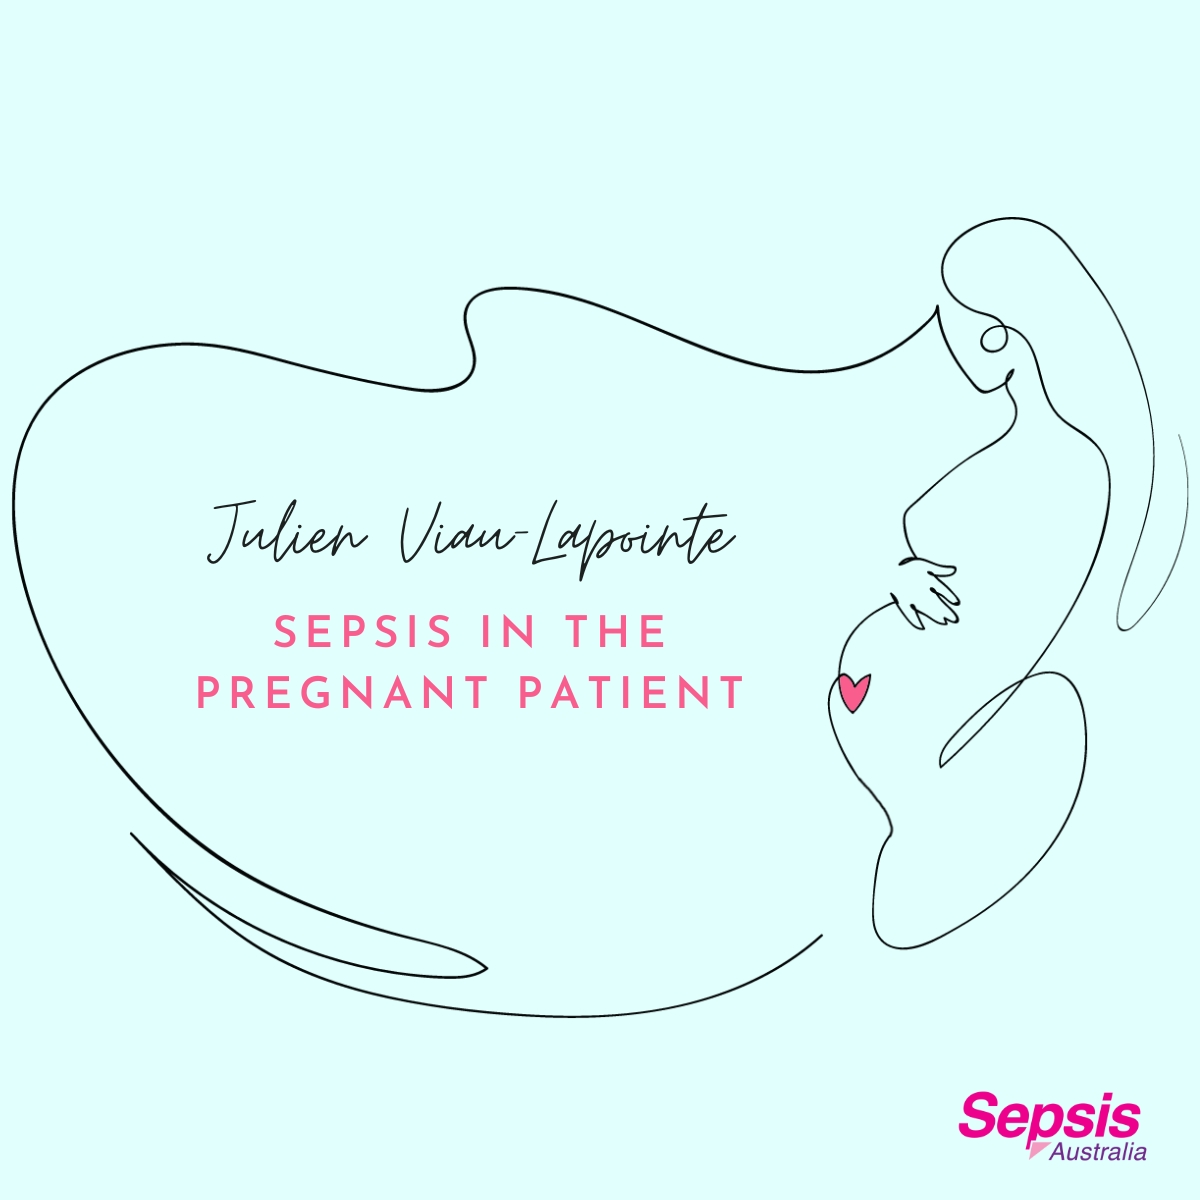 🌐 Free sepsis lectures from international experts. Brought to you by Sepsis Australia. 🔗 To watch the video, visit: continulus.com/lp/sepsis/ The Pocketbook of Sepsis. Global experts, Global Impact. #sepsis #pregnantpatient @sepsisAU